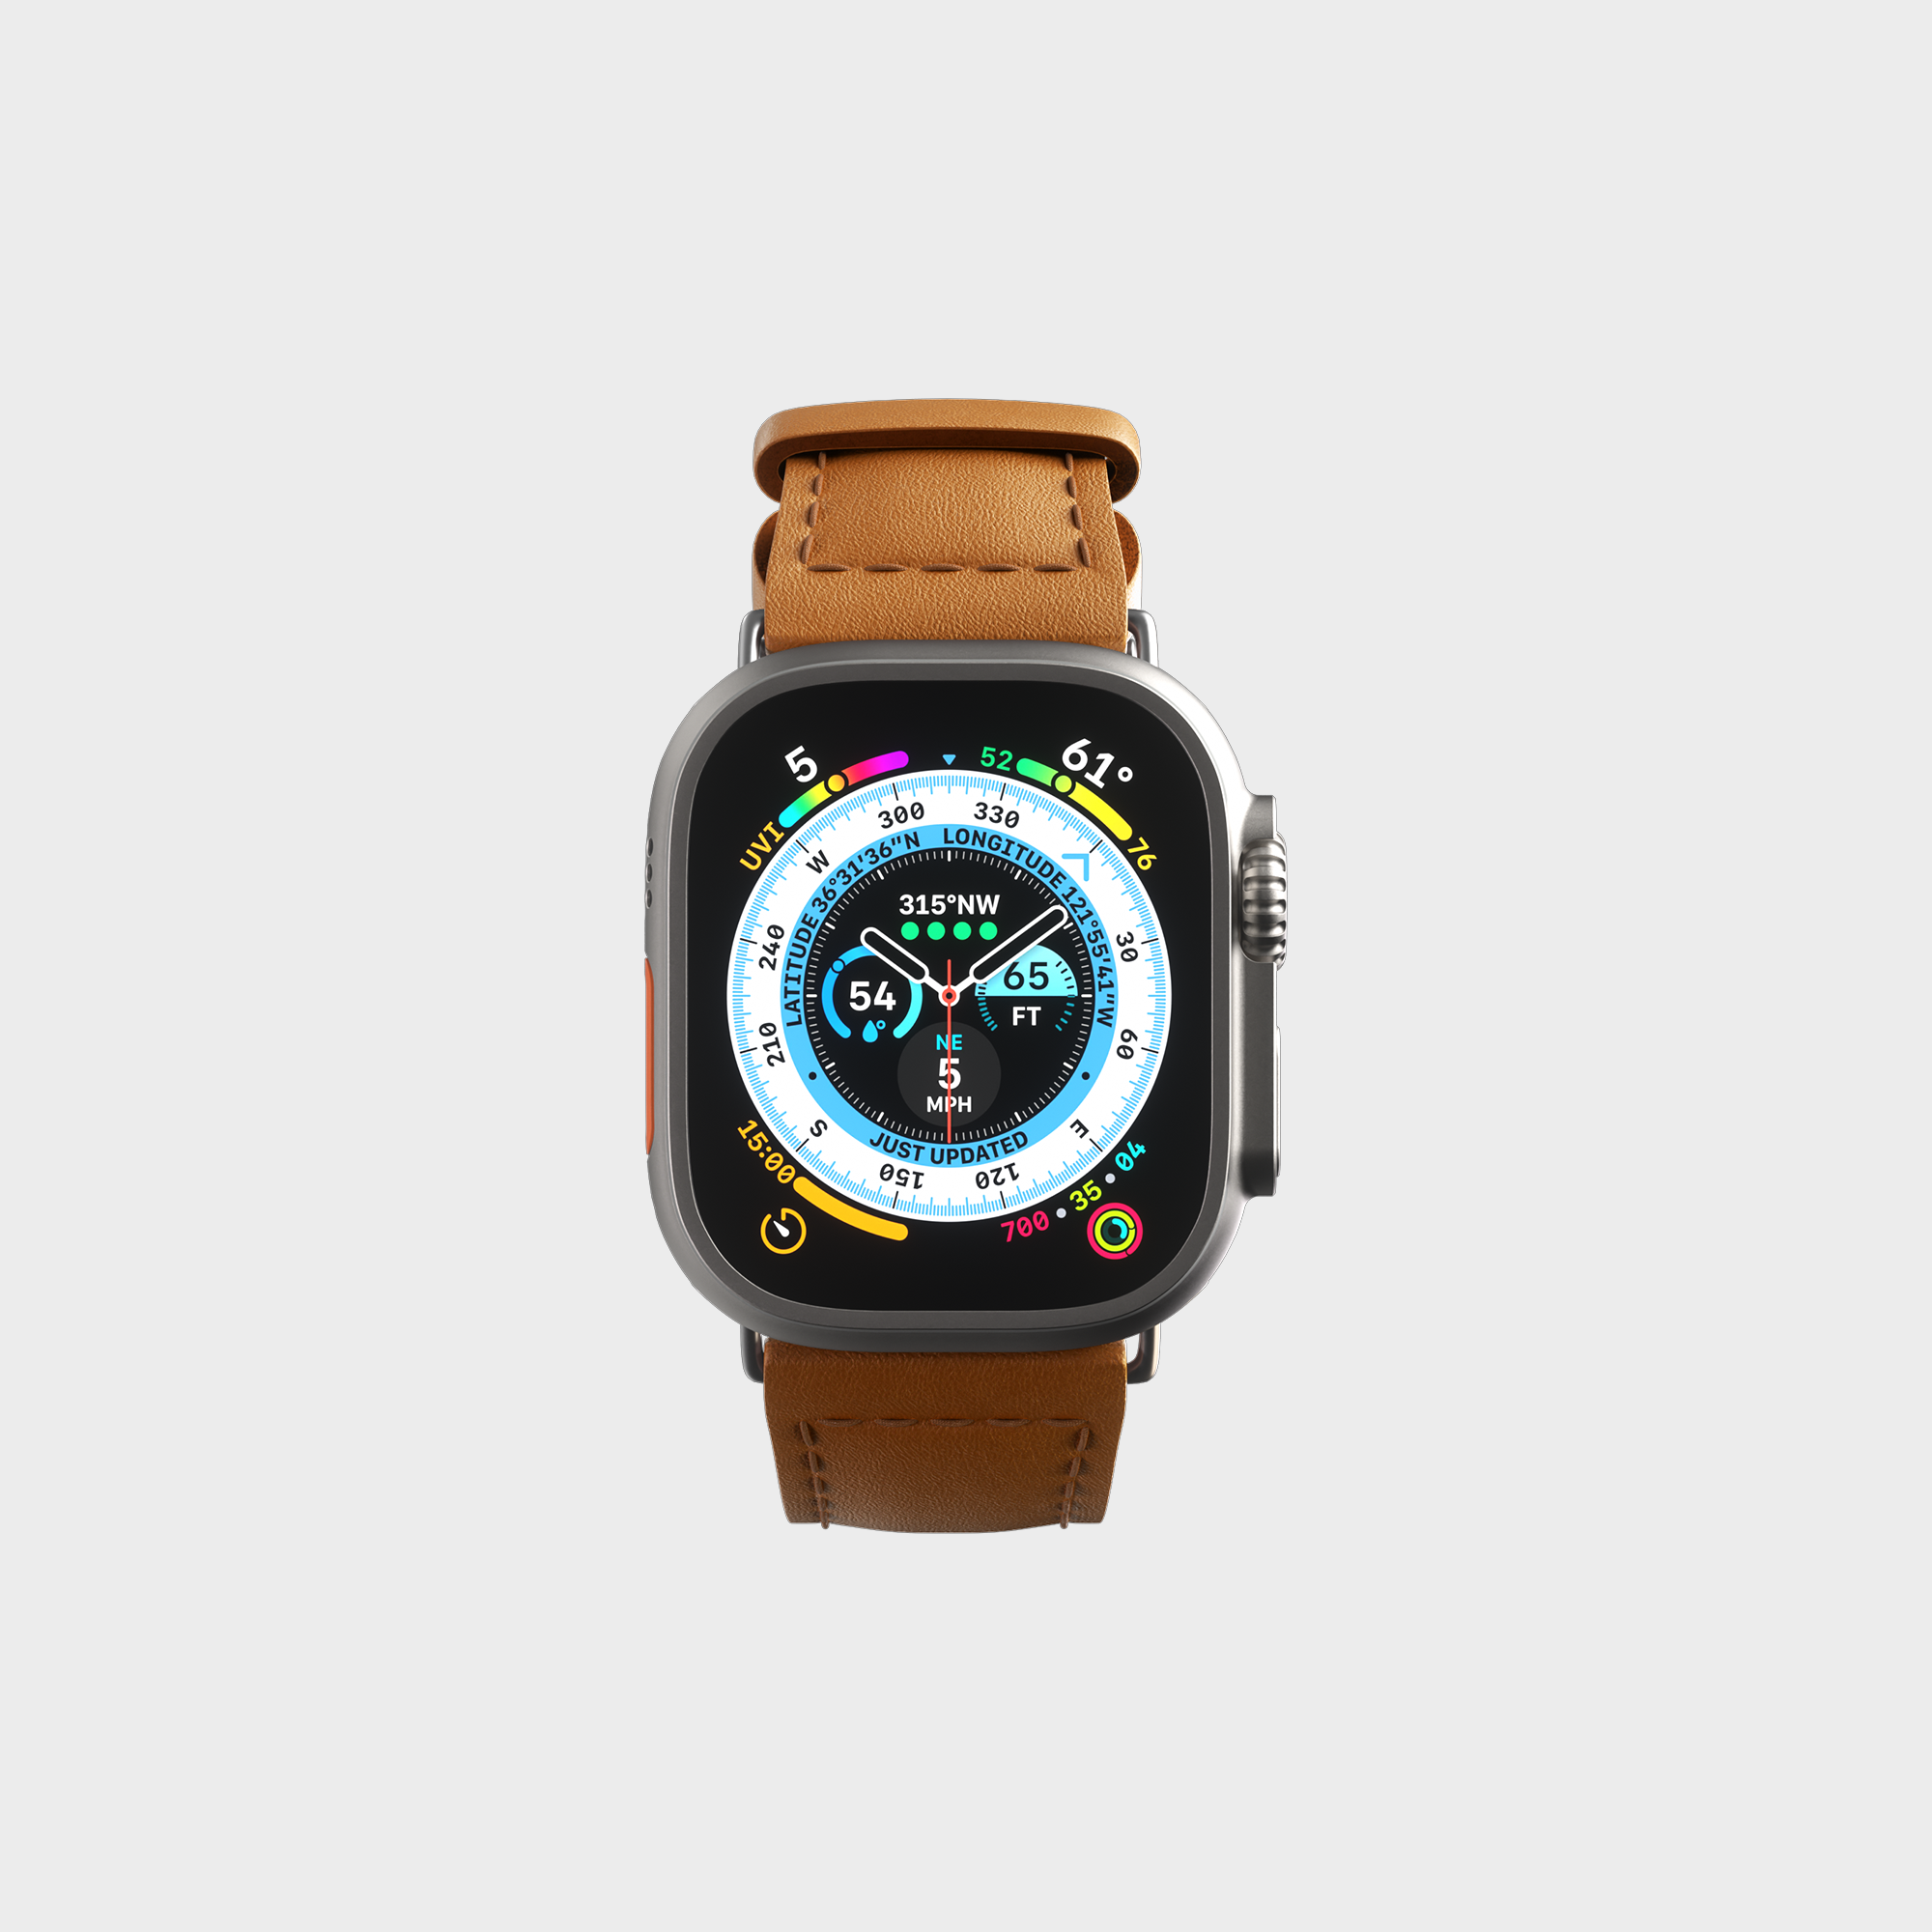 Smartwatch with tan leather strap and digital compass display on white background.